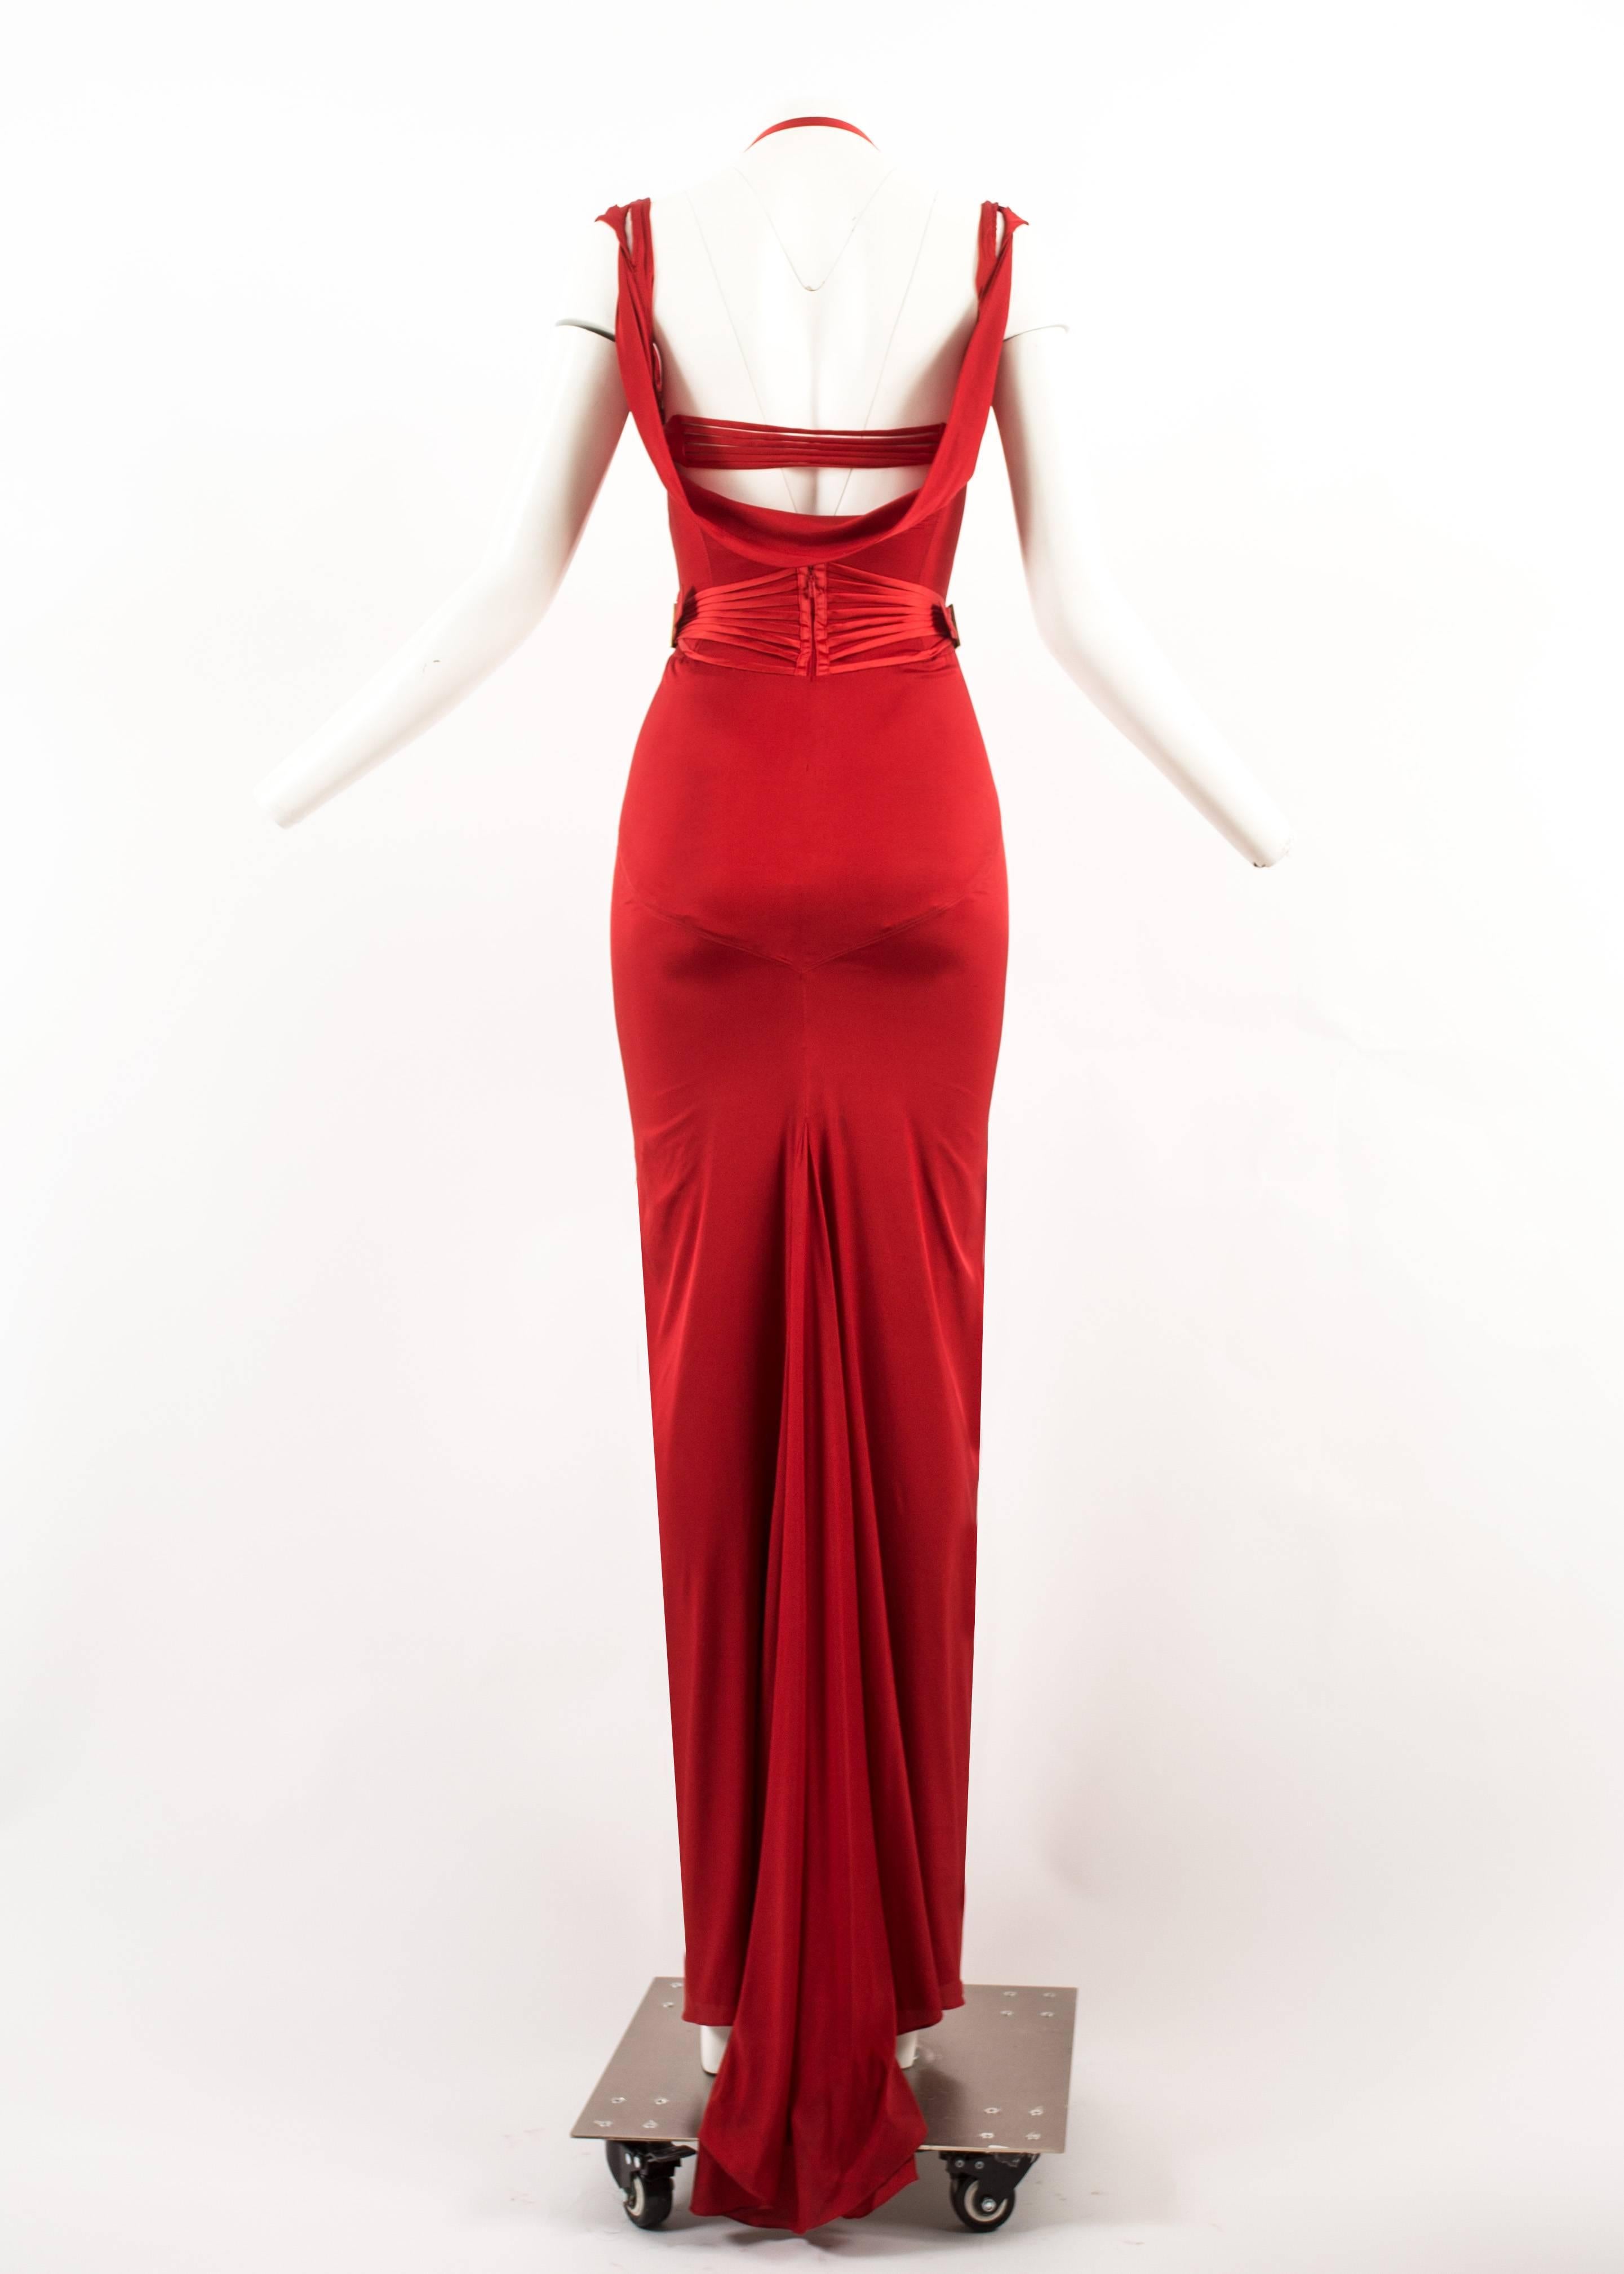 Women's Tom Ford for Gucci Autumn-Winter 2003 red silk corseted evening gown 